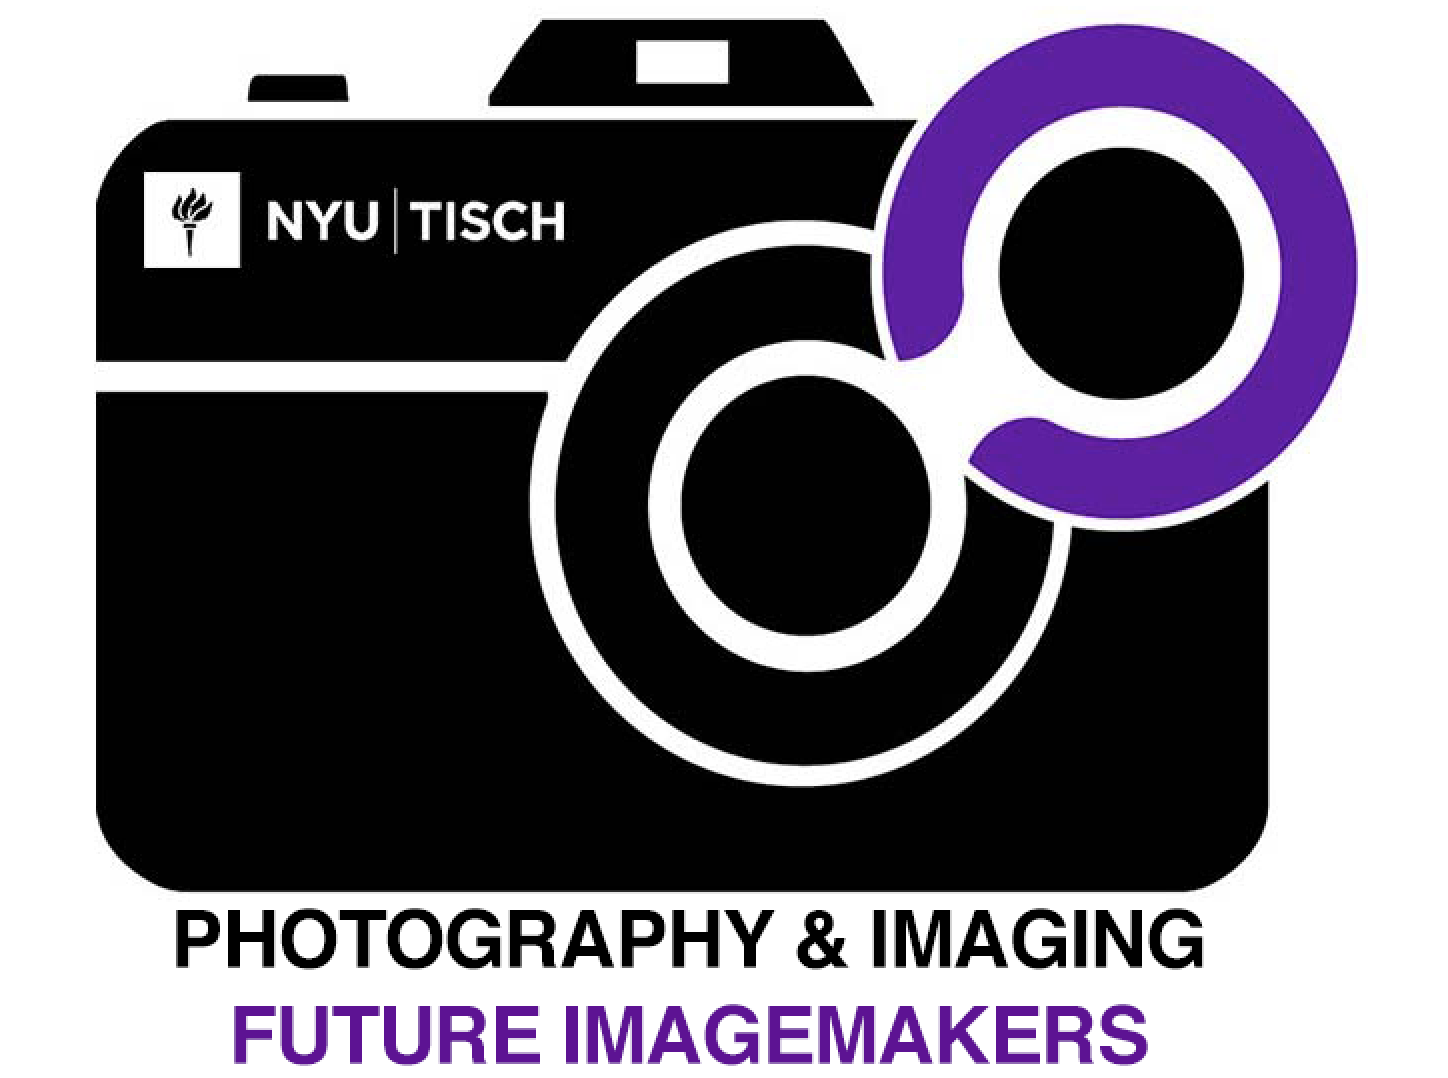 FI logo - camera with text underneath that says Department of Photography and Imaging, Future Imagemakers 